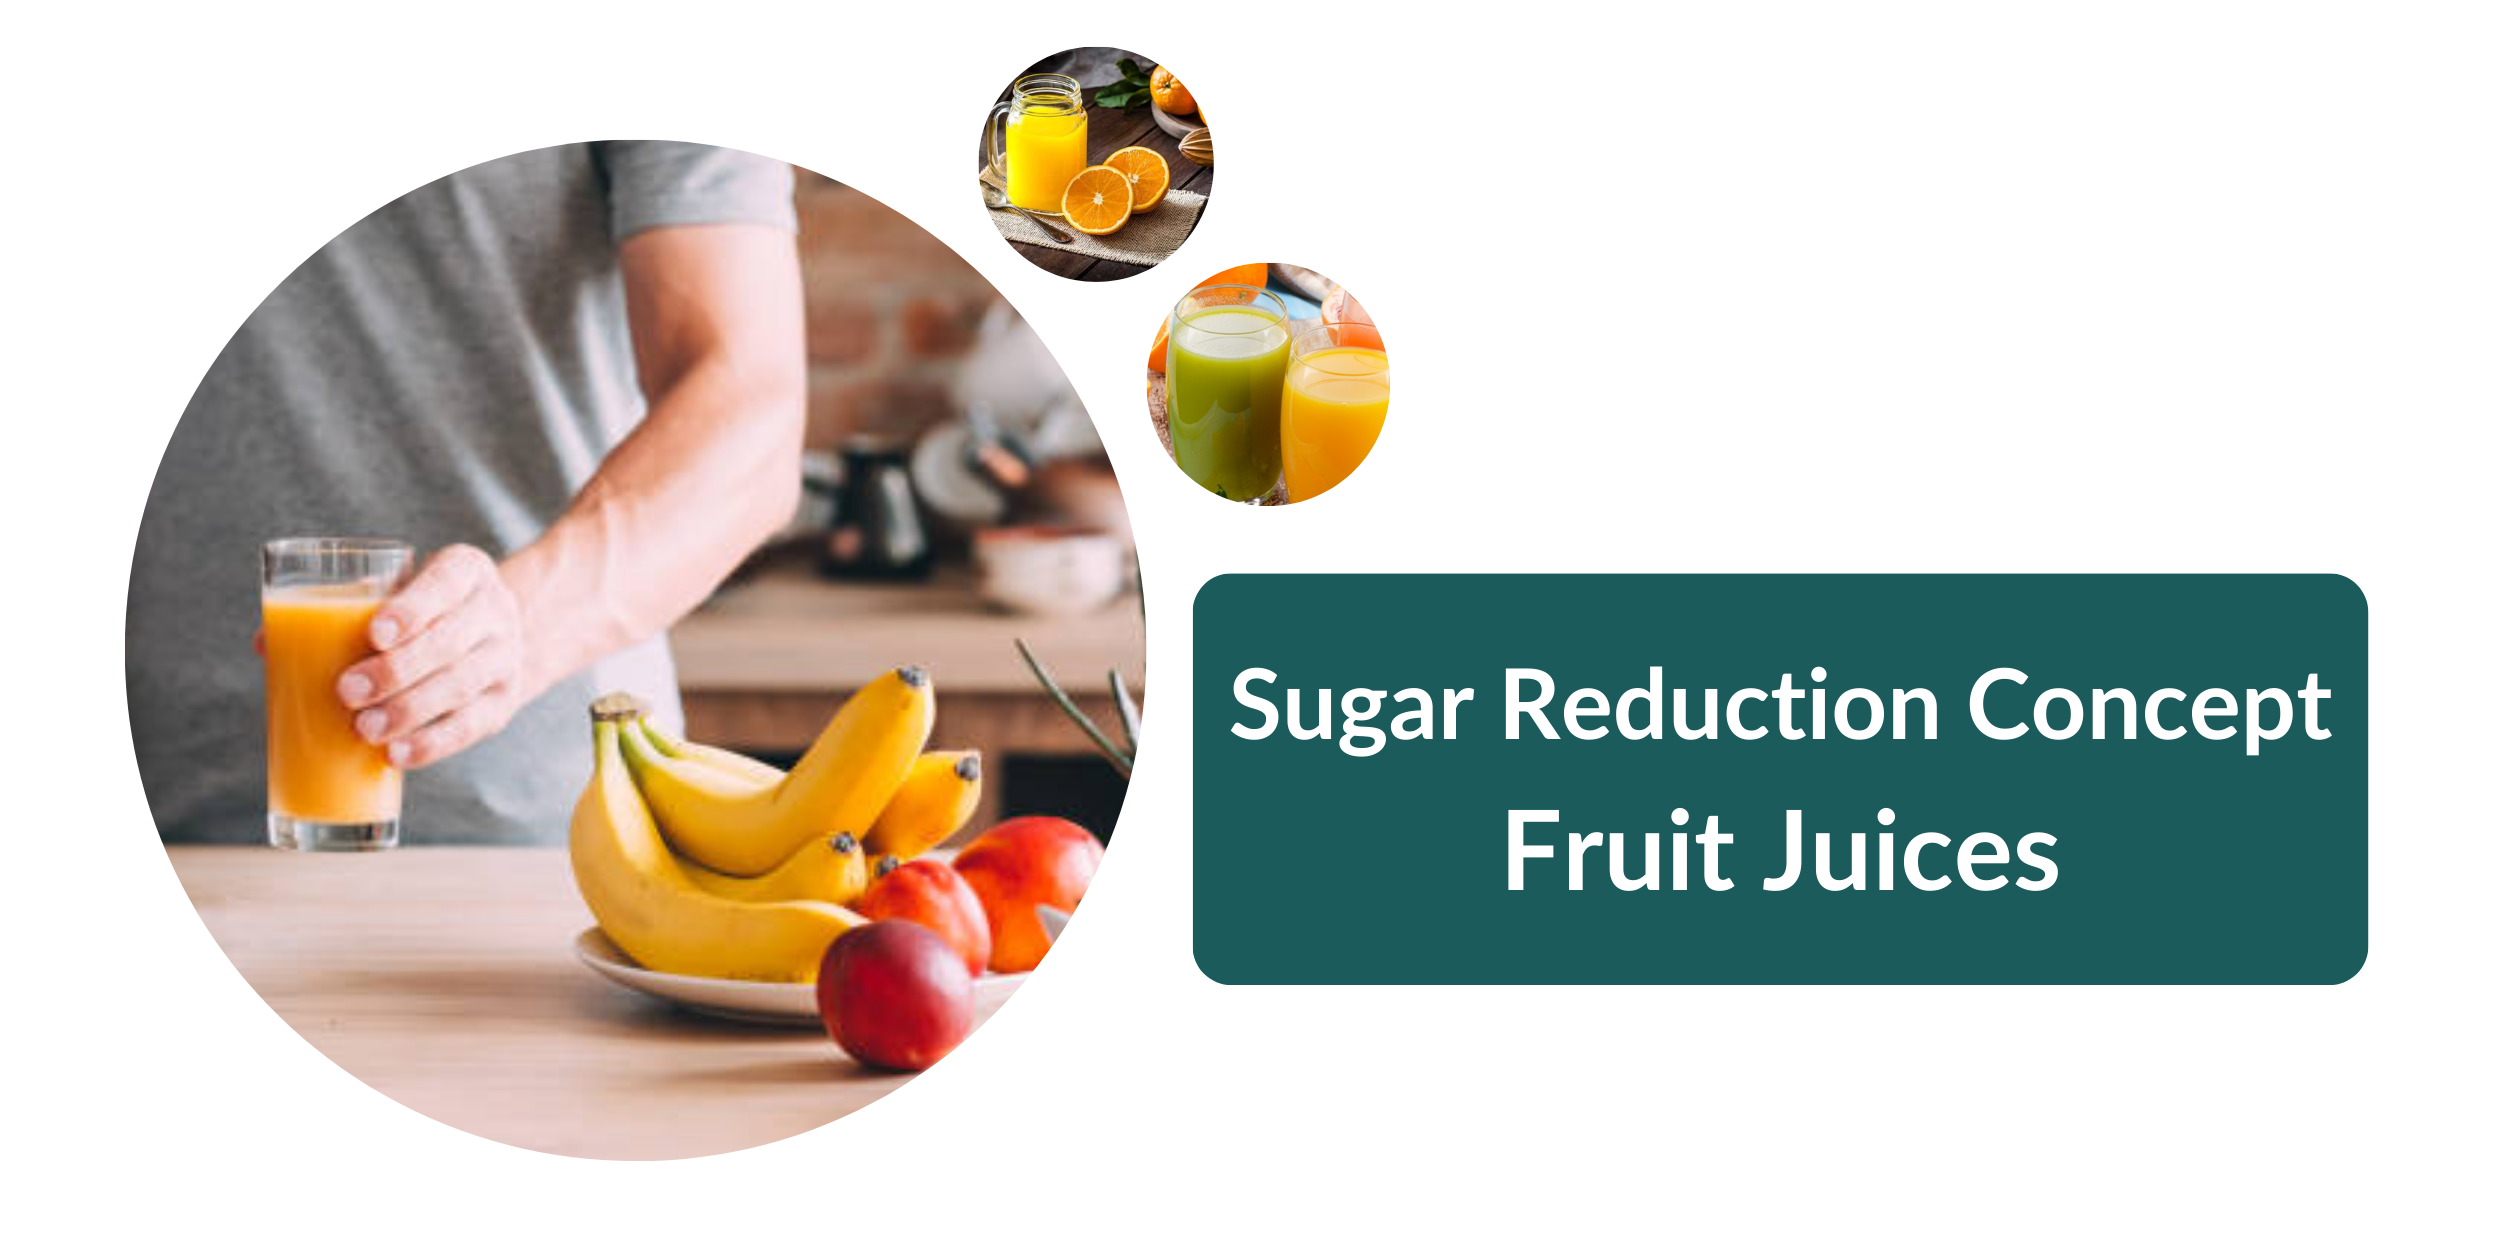 Sugar Replacement & Reduction Solutions for Fruit Juices using Stevia Blends